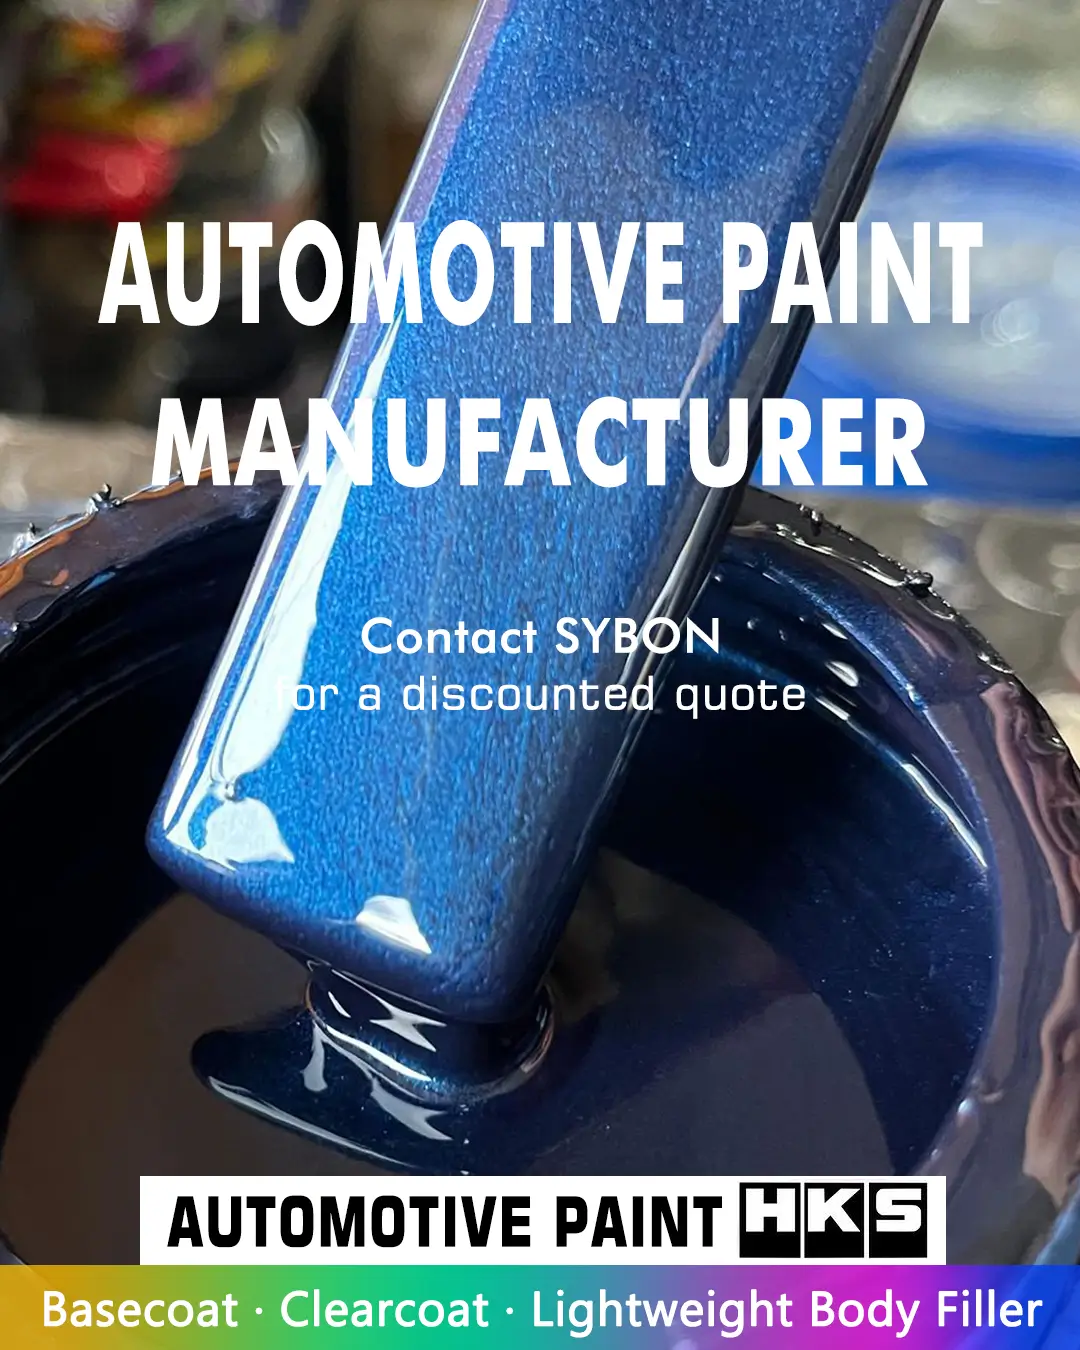 1703216786 Your Premier Choice Among Automotive Paint Dealers Near Me Embark on a Journey of Quality and Affordability in Distributor Partnerships